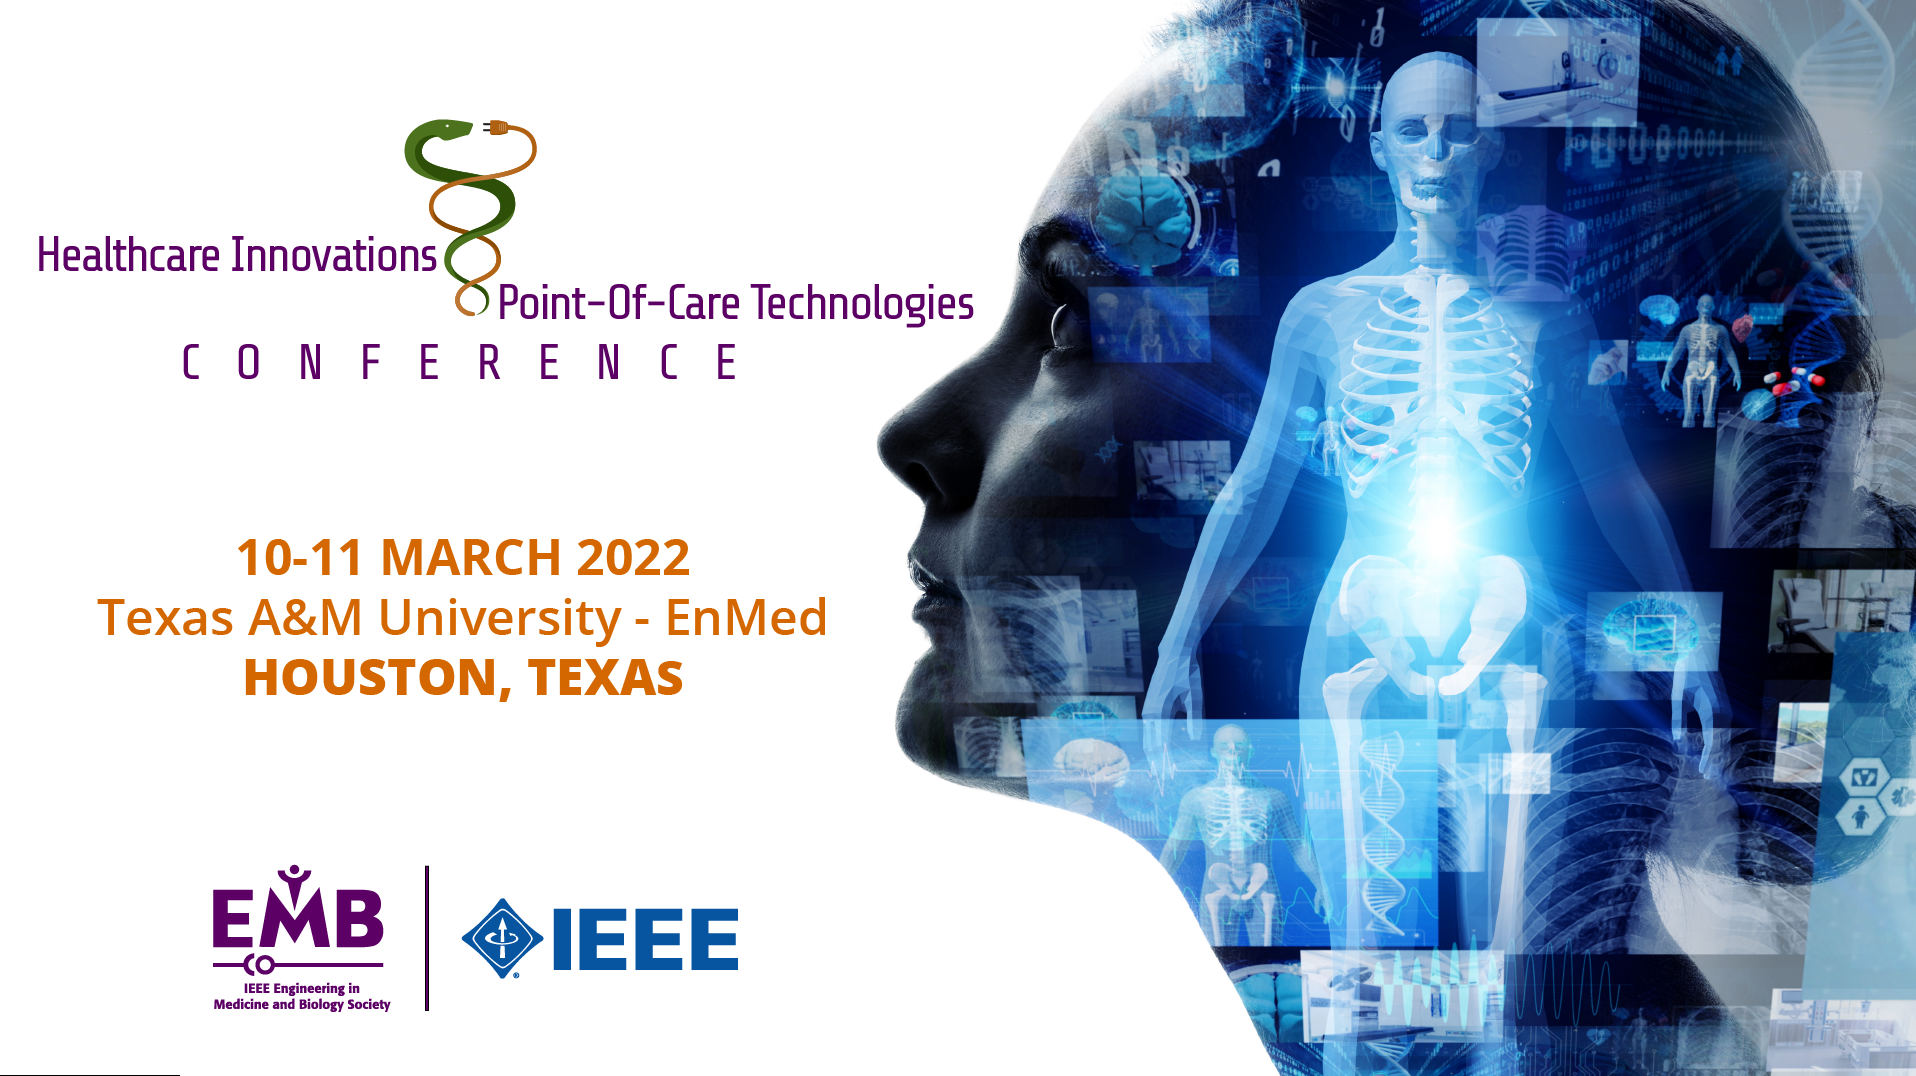 Healthcare innovation point of care conference, 10-11 march 2022, Texas A&M Enmed, Houston Texas